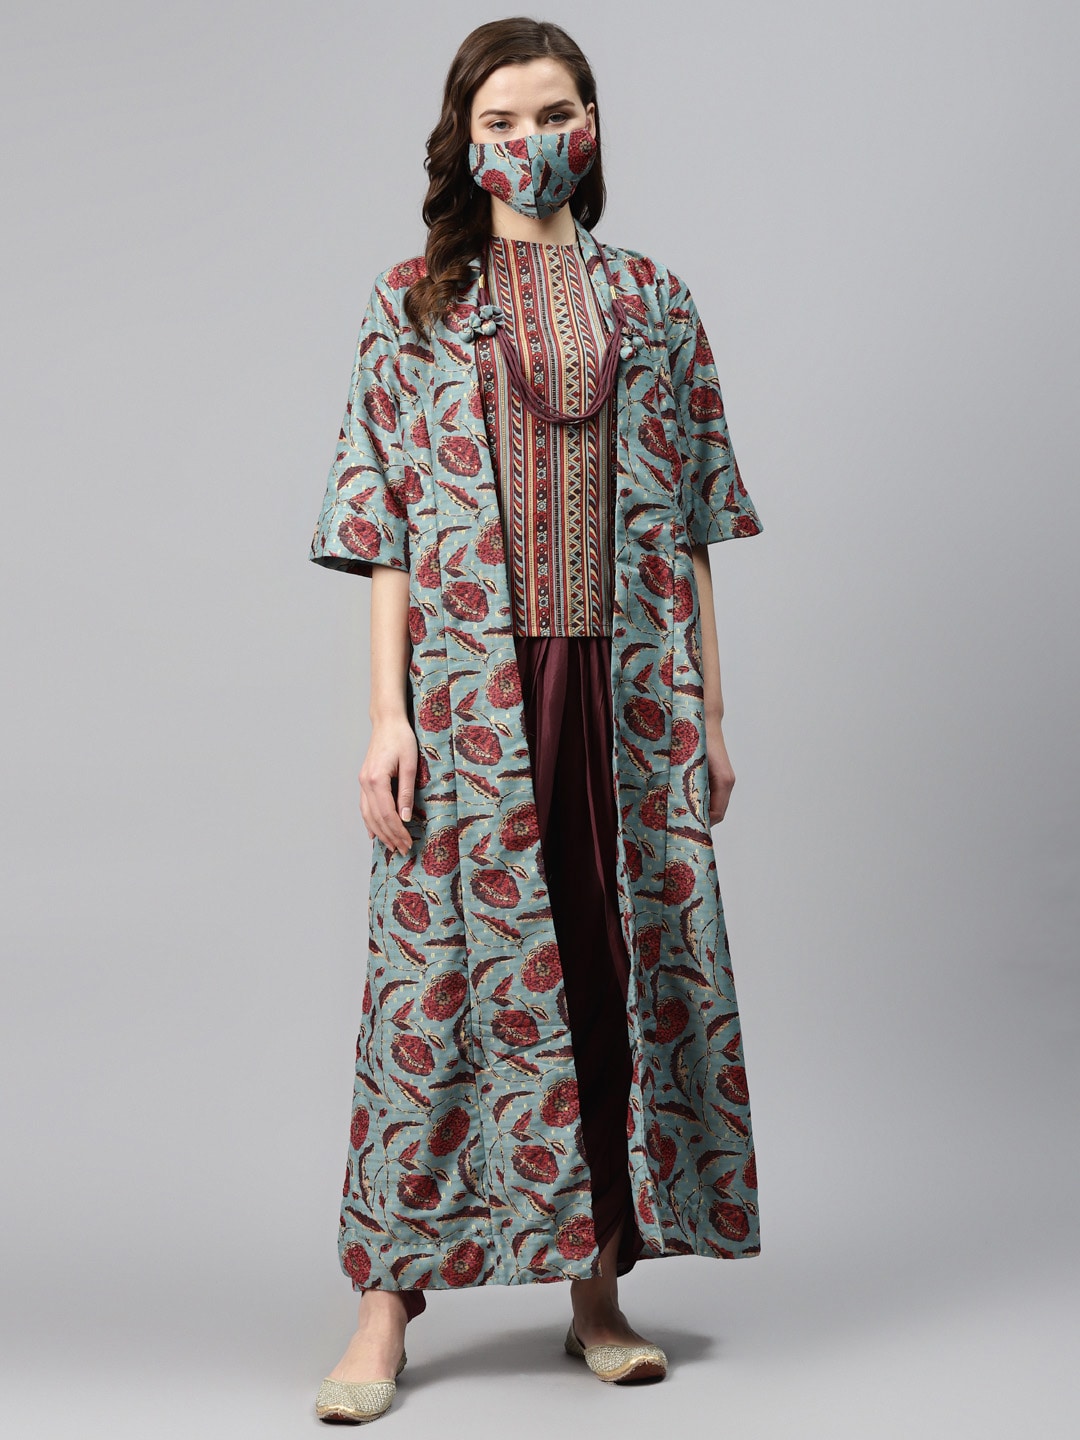 Biba Women Grey & Burgundy Striped Top with Dhoti Pants & Floral Ethnic Jacket Price in India